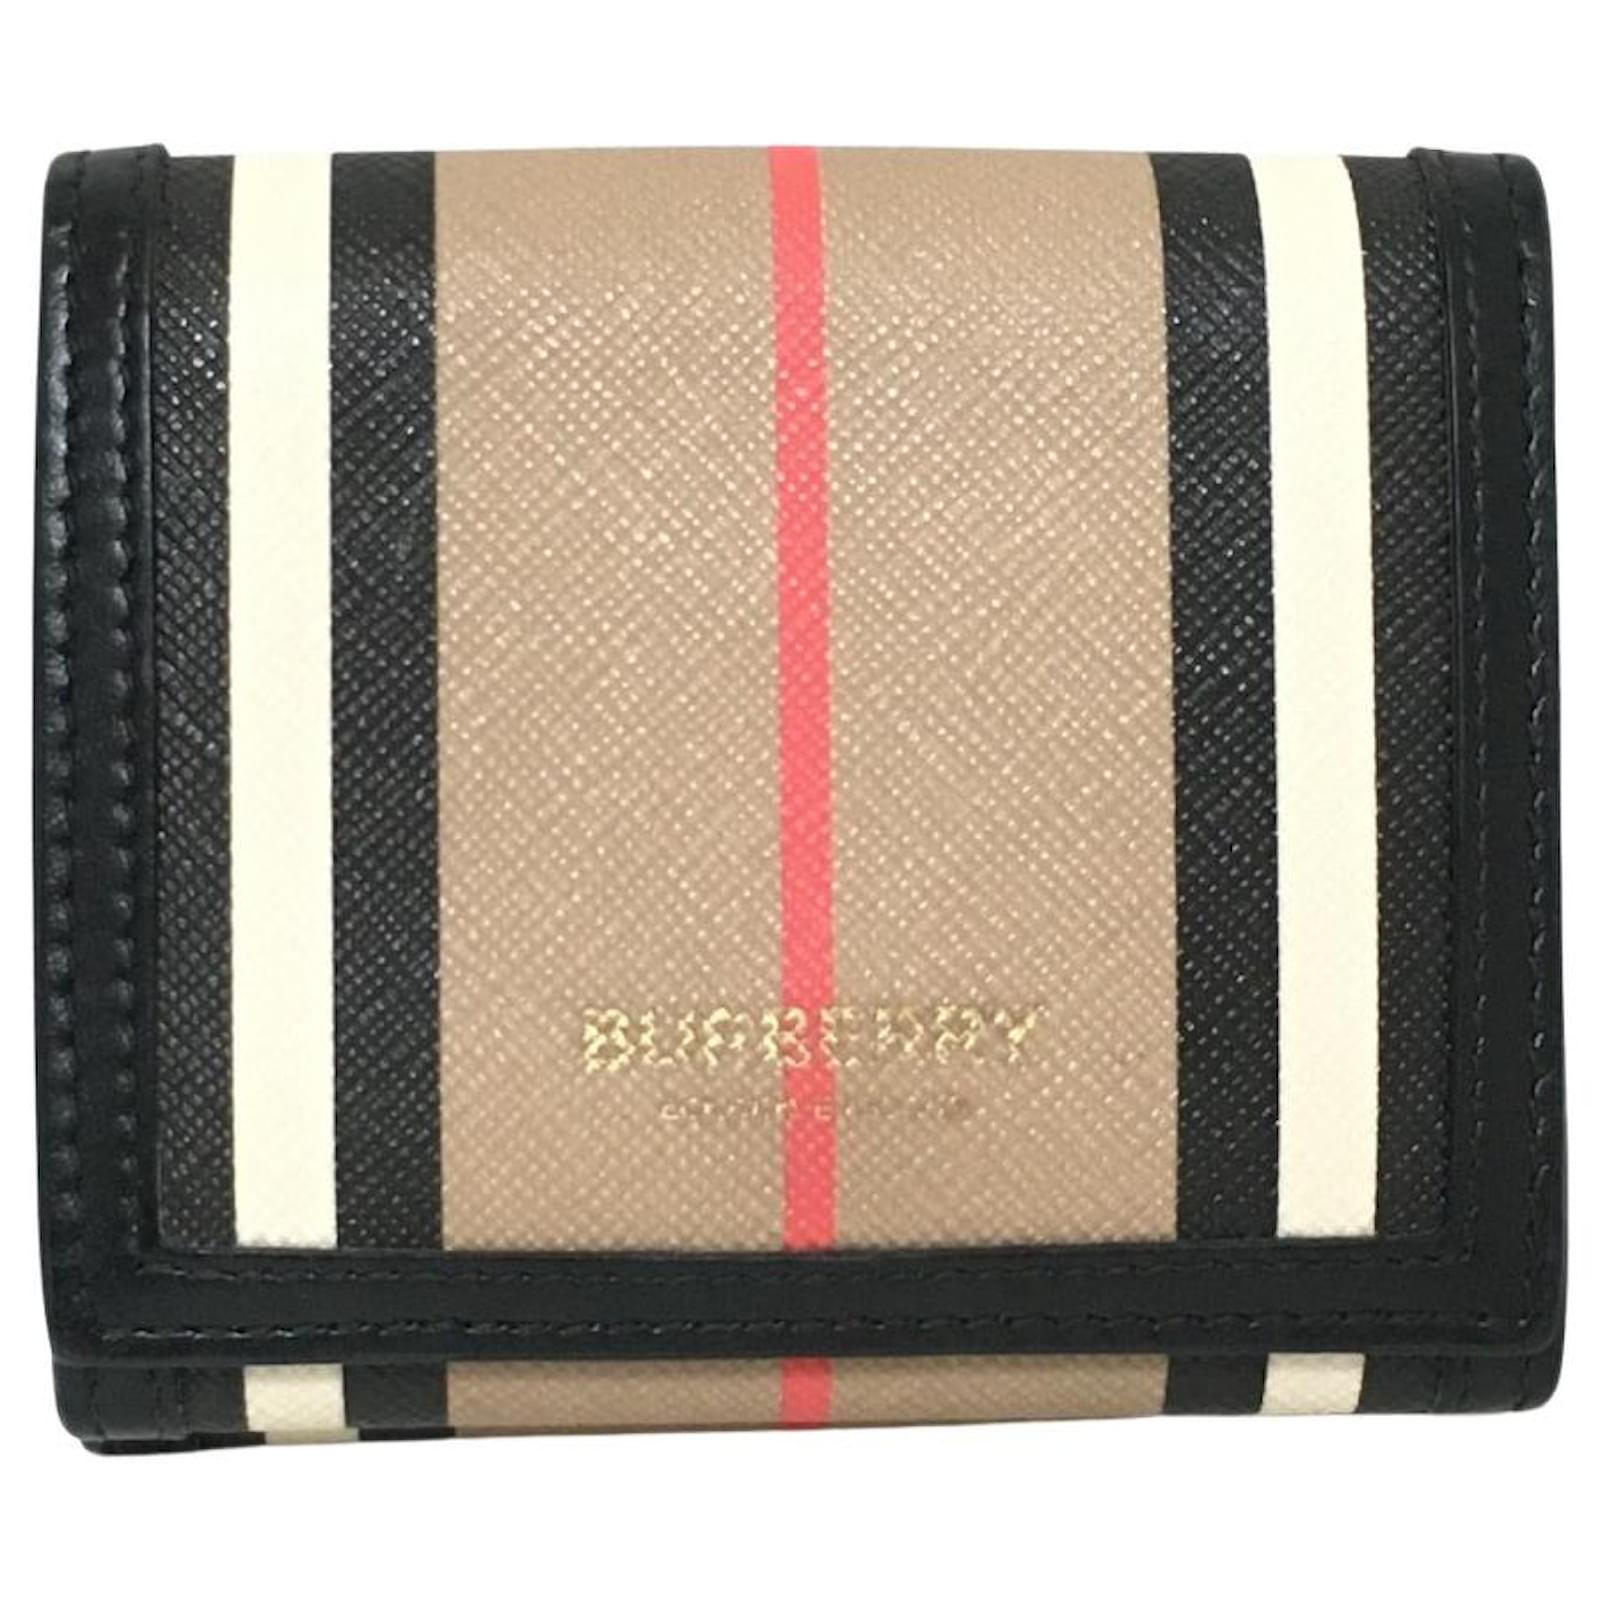 BURBERRY Nova Check Coin Purse PVC Leather Beige Black Red Auth 38422